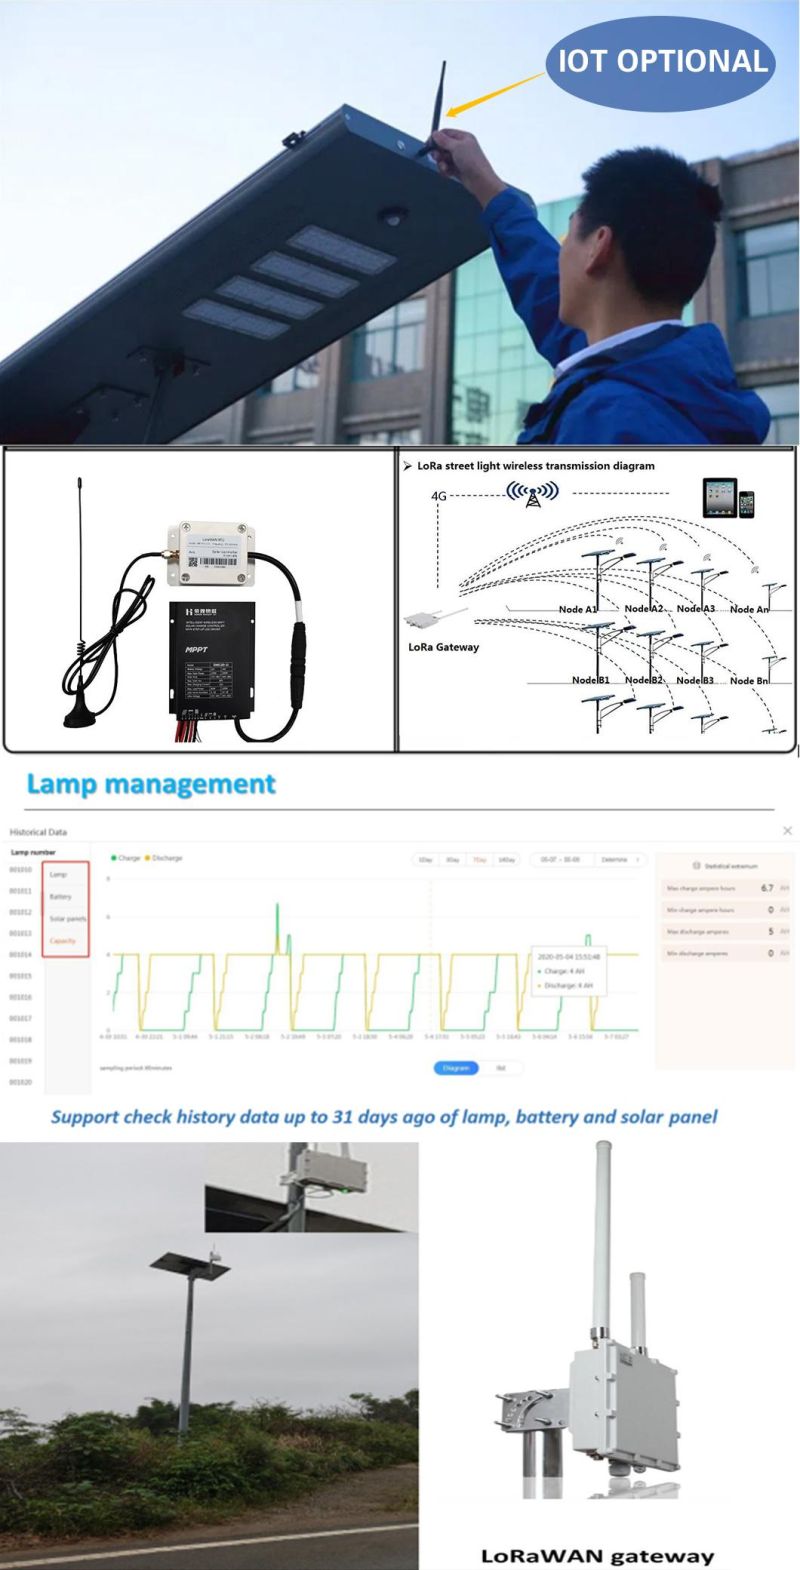 New Product 30W Auto-Clean All-in-One Solar Street Light Manufacturered in China